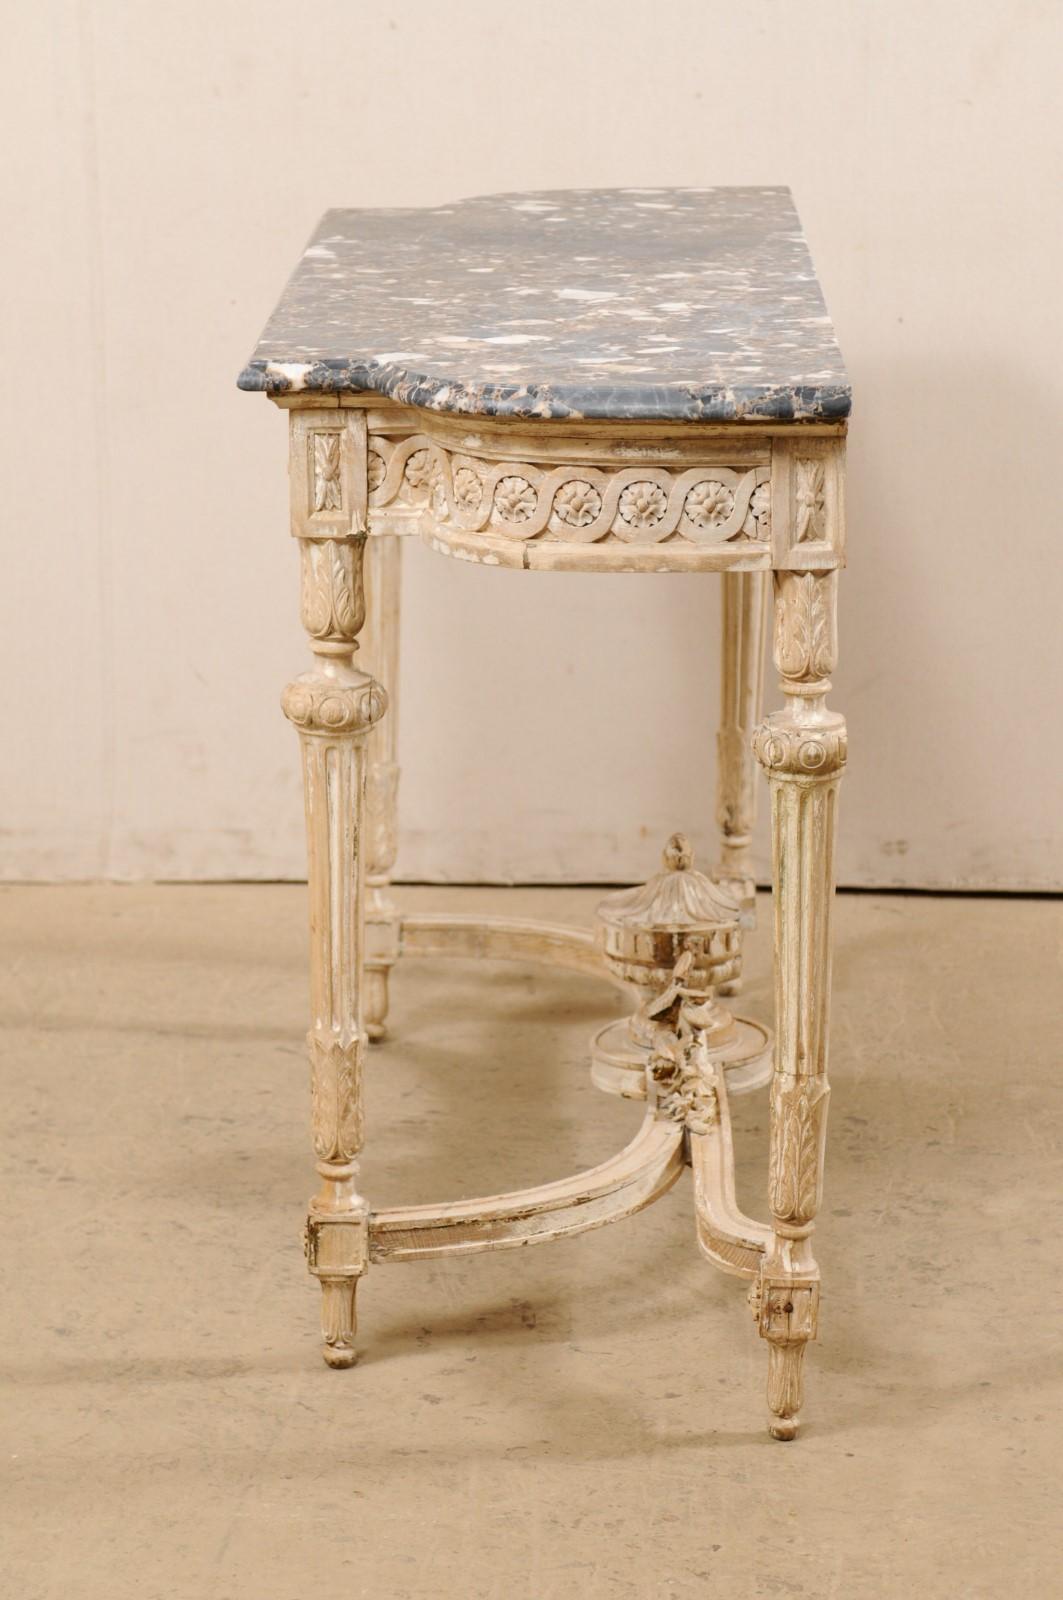 Antique French Marble-Top Console Table with Carved Urn & Foliage at Underside 7